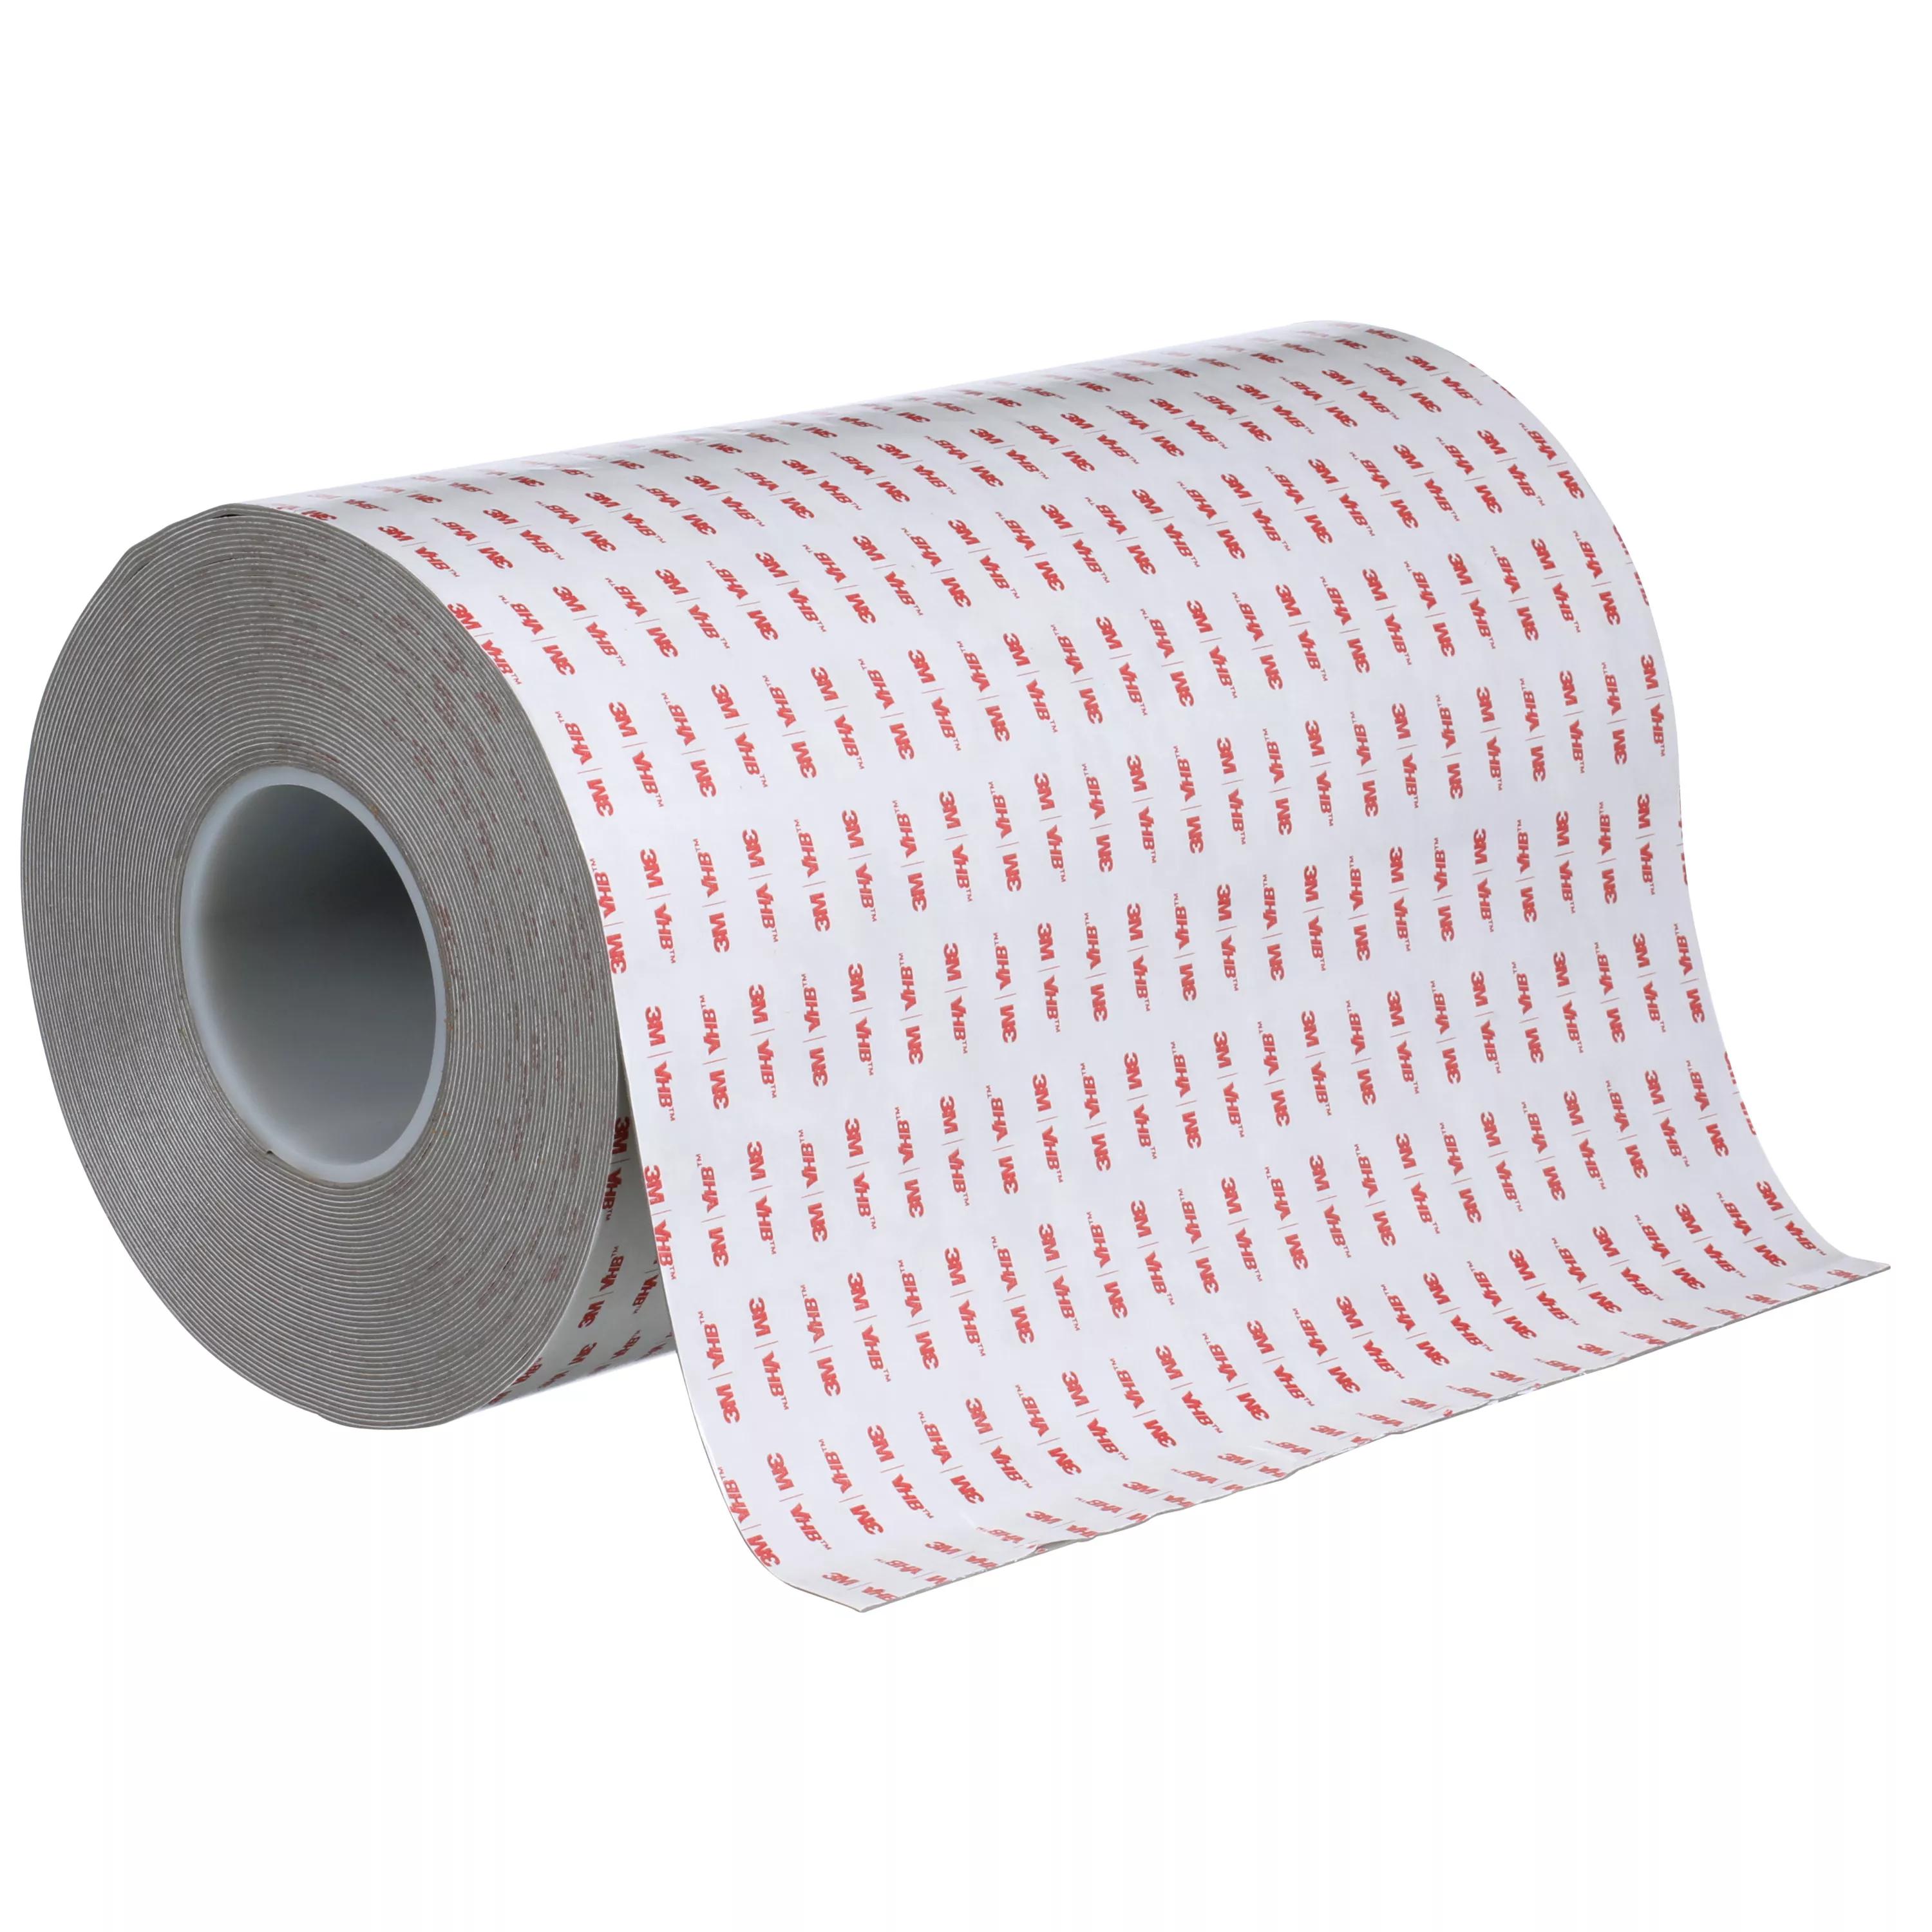 3M™ VHB™ Tape RP+080GP, Gray, 22 in x 36 yd, 32 mil, Paper Liner, 1 Roll/Case